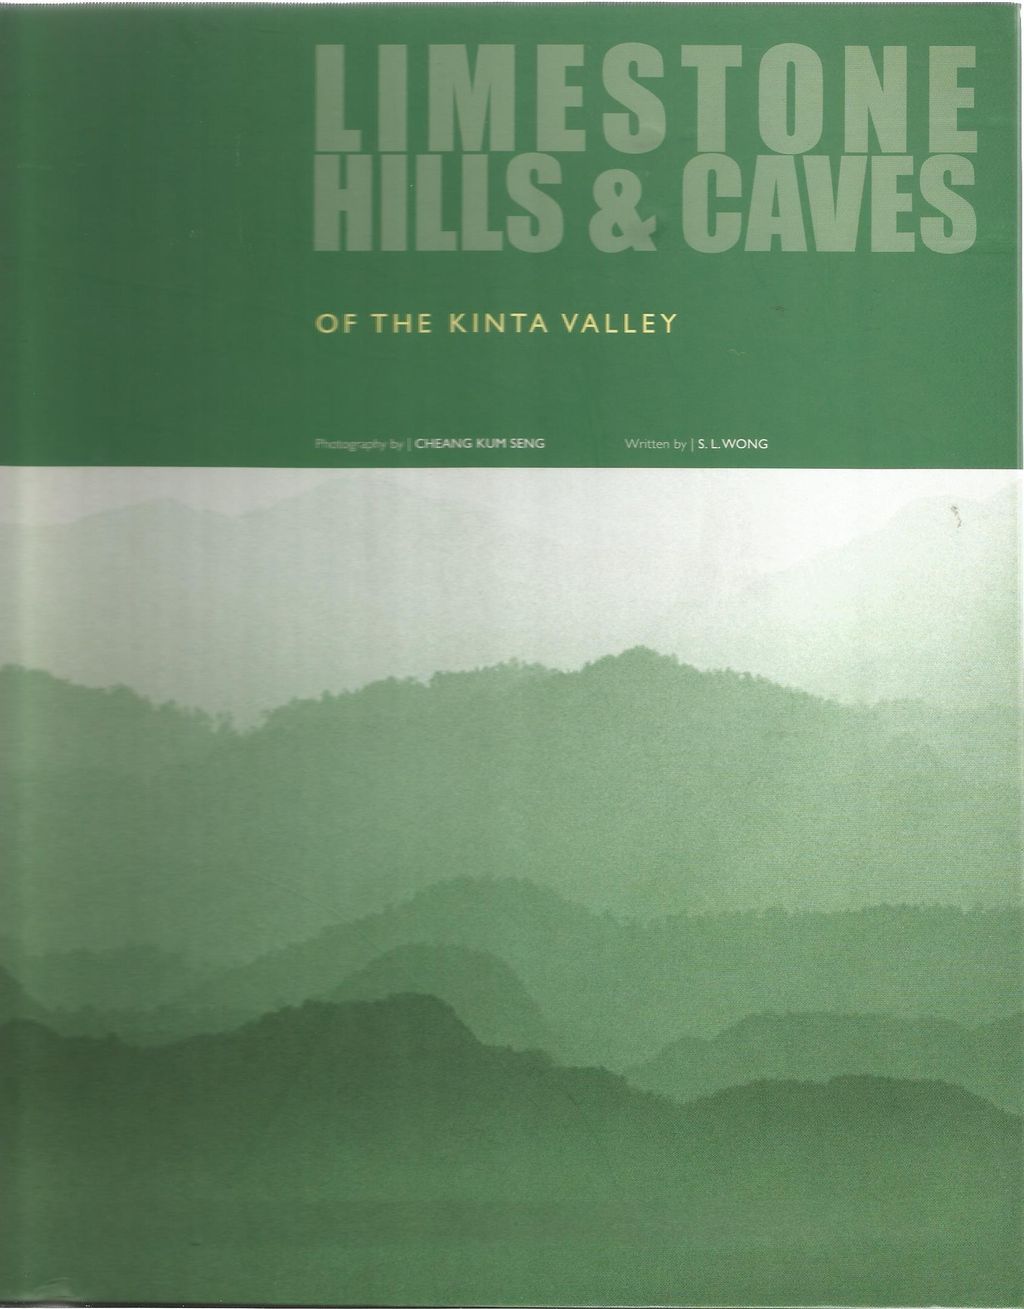 Limestone Hills & Caves of the Kinta Valley